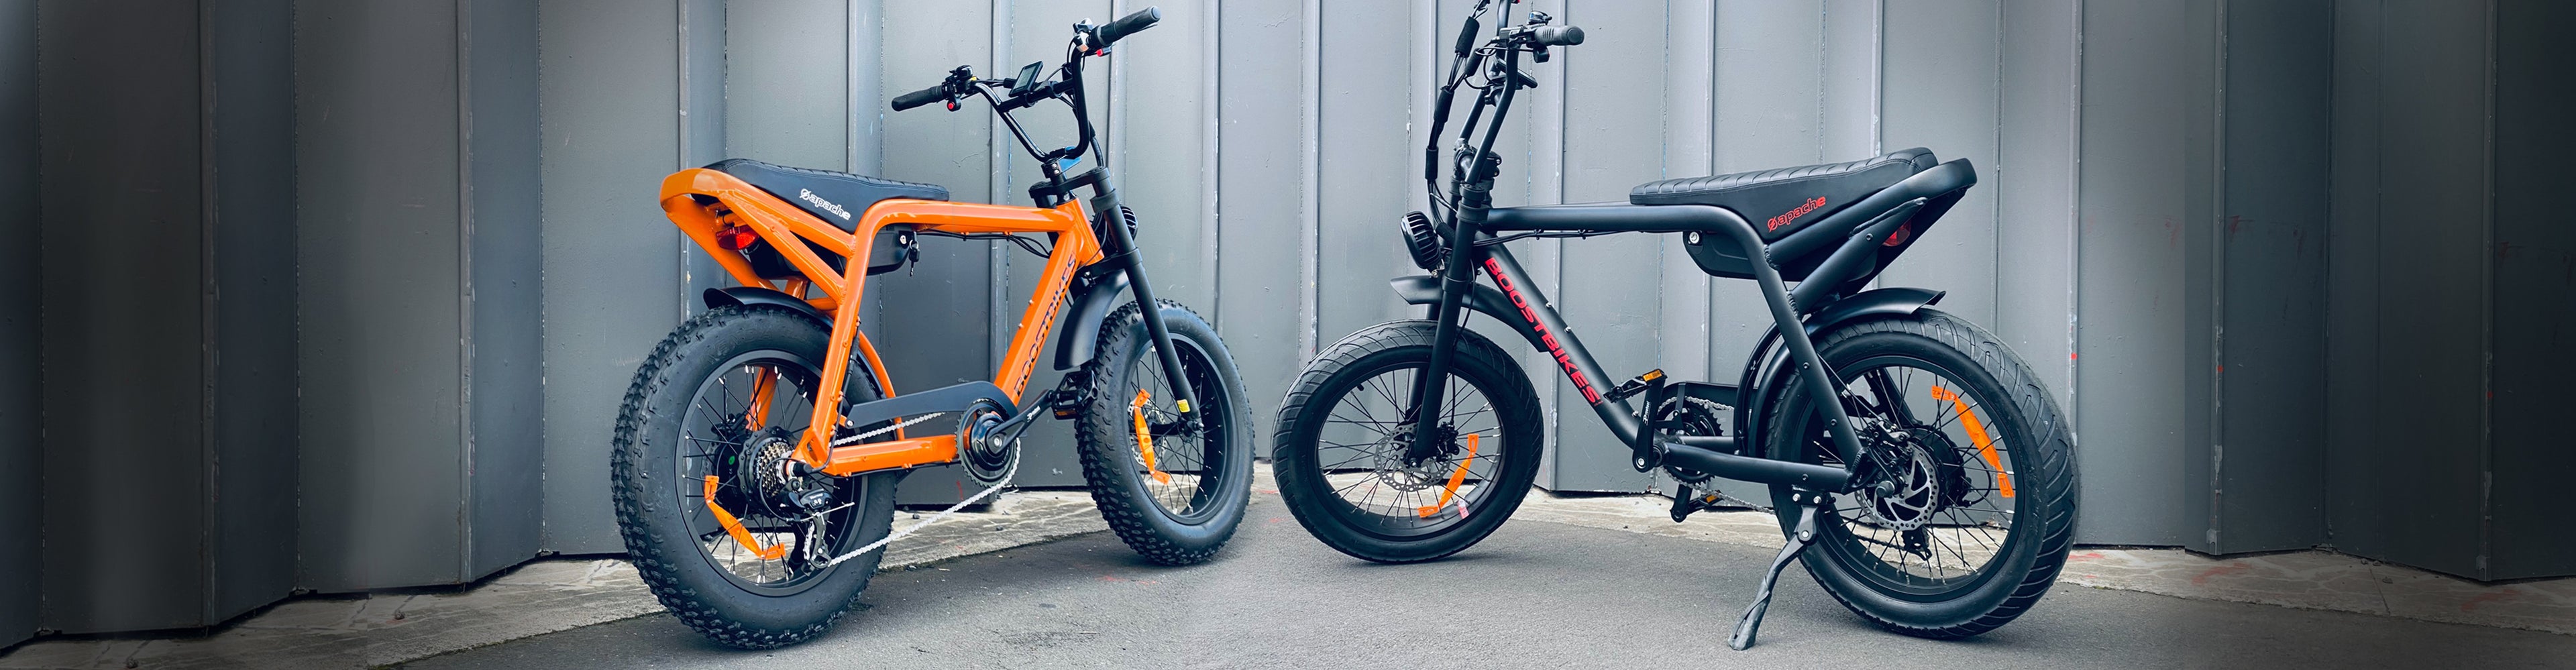 Apache. Super 73 style 20 x 4 Electric Bike from Boostbikes